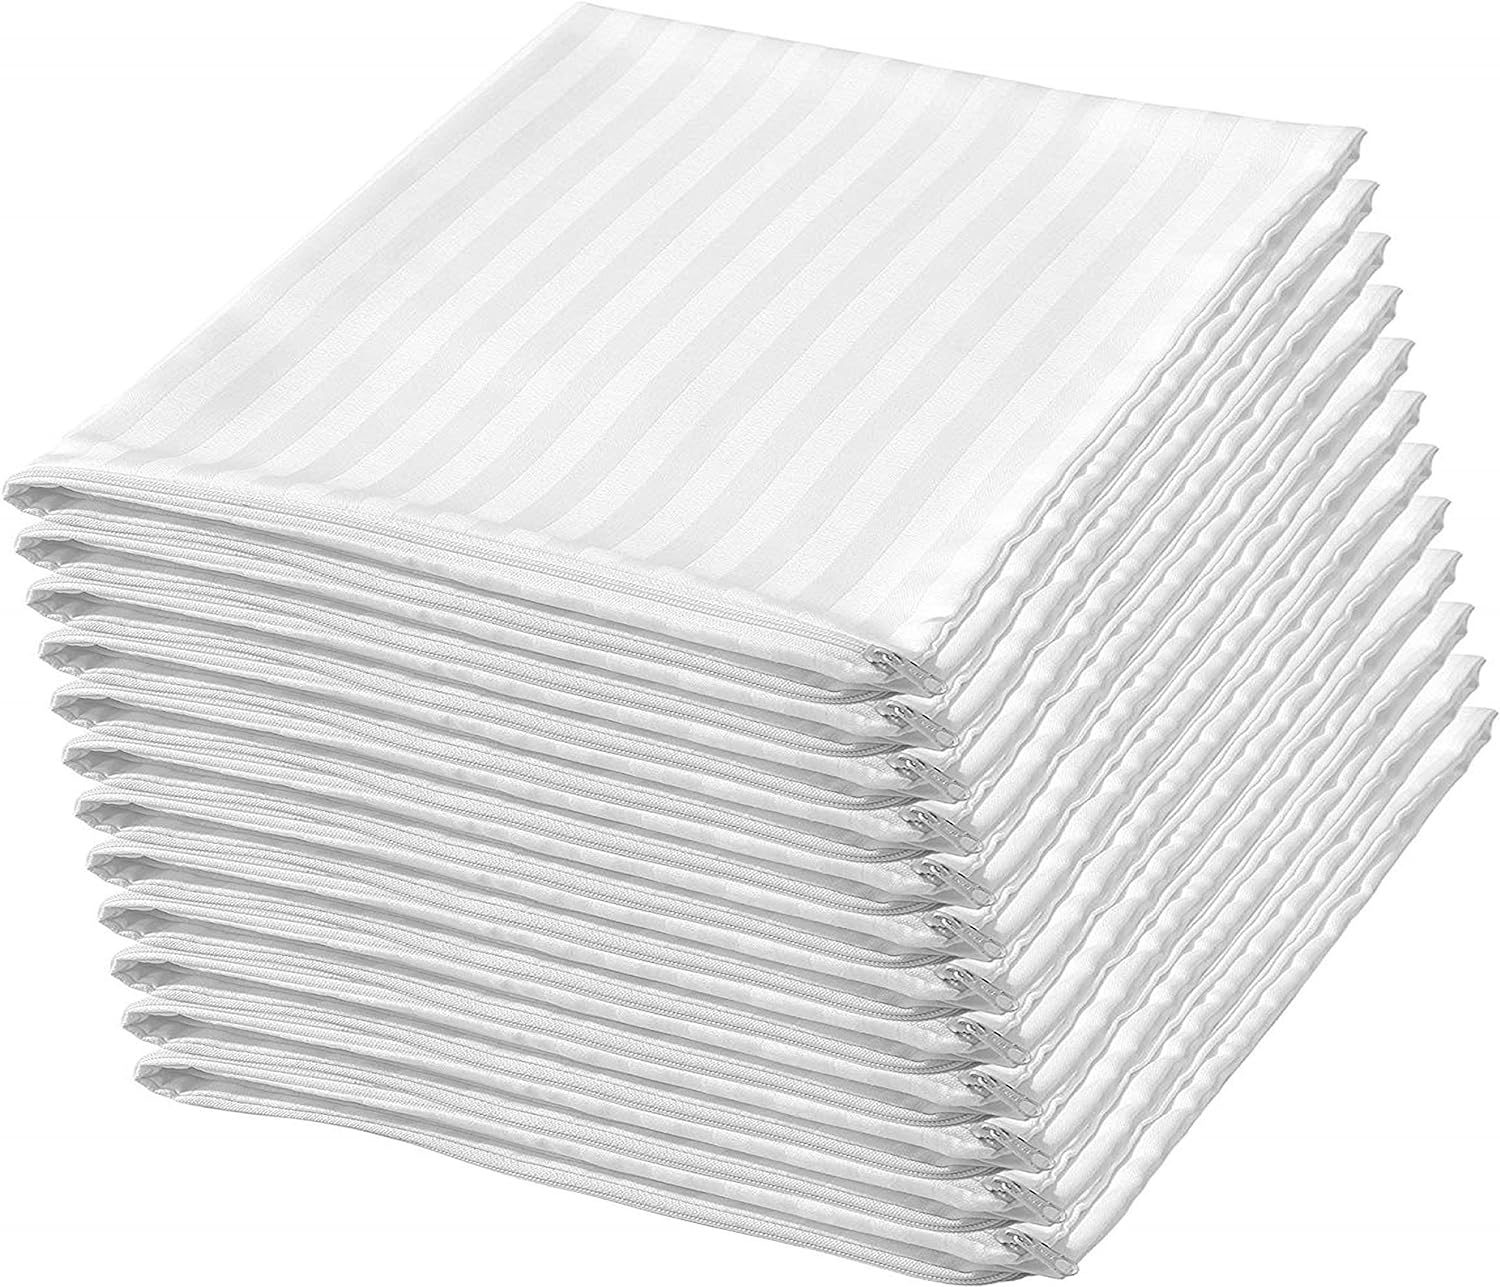 Pillow Protectors King 12 Pack Zippered Pillowcases White Covers Premium High 200 300 Thread Count Cotton Sateen Blend Set of Dozen Hotel Quality (12 Pack King)